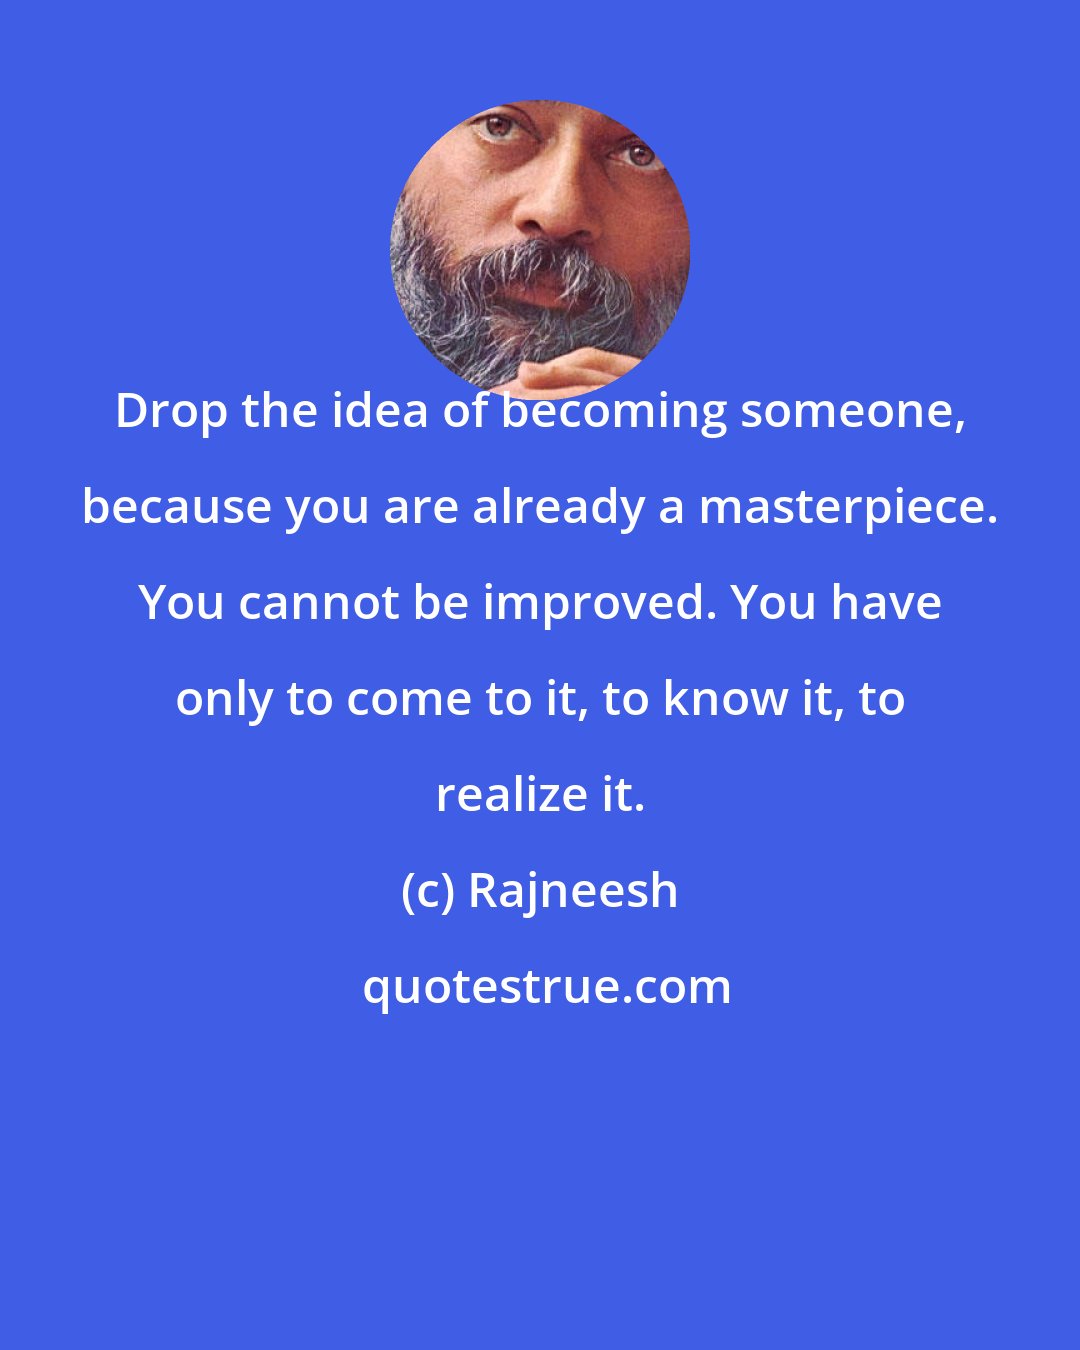 Rajneesh: Drop the idea of becoming someone, because you are already a masterpiece. You cannot be improved. You have only to come to it, to know it, to realize it.